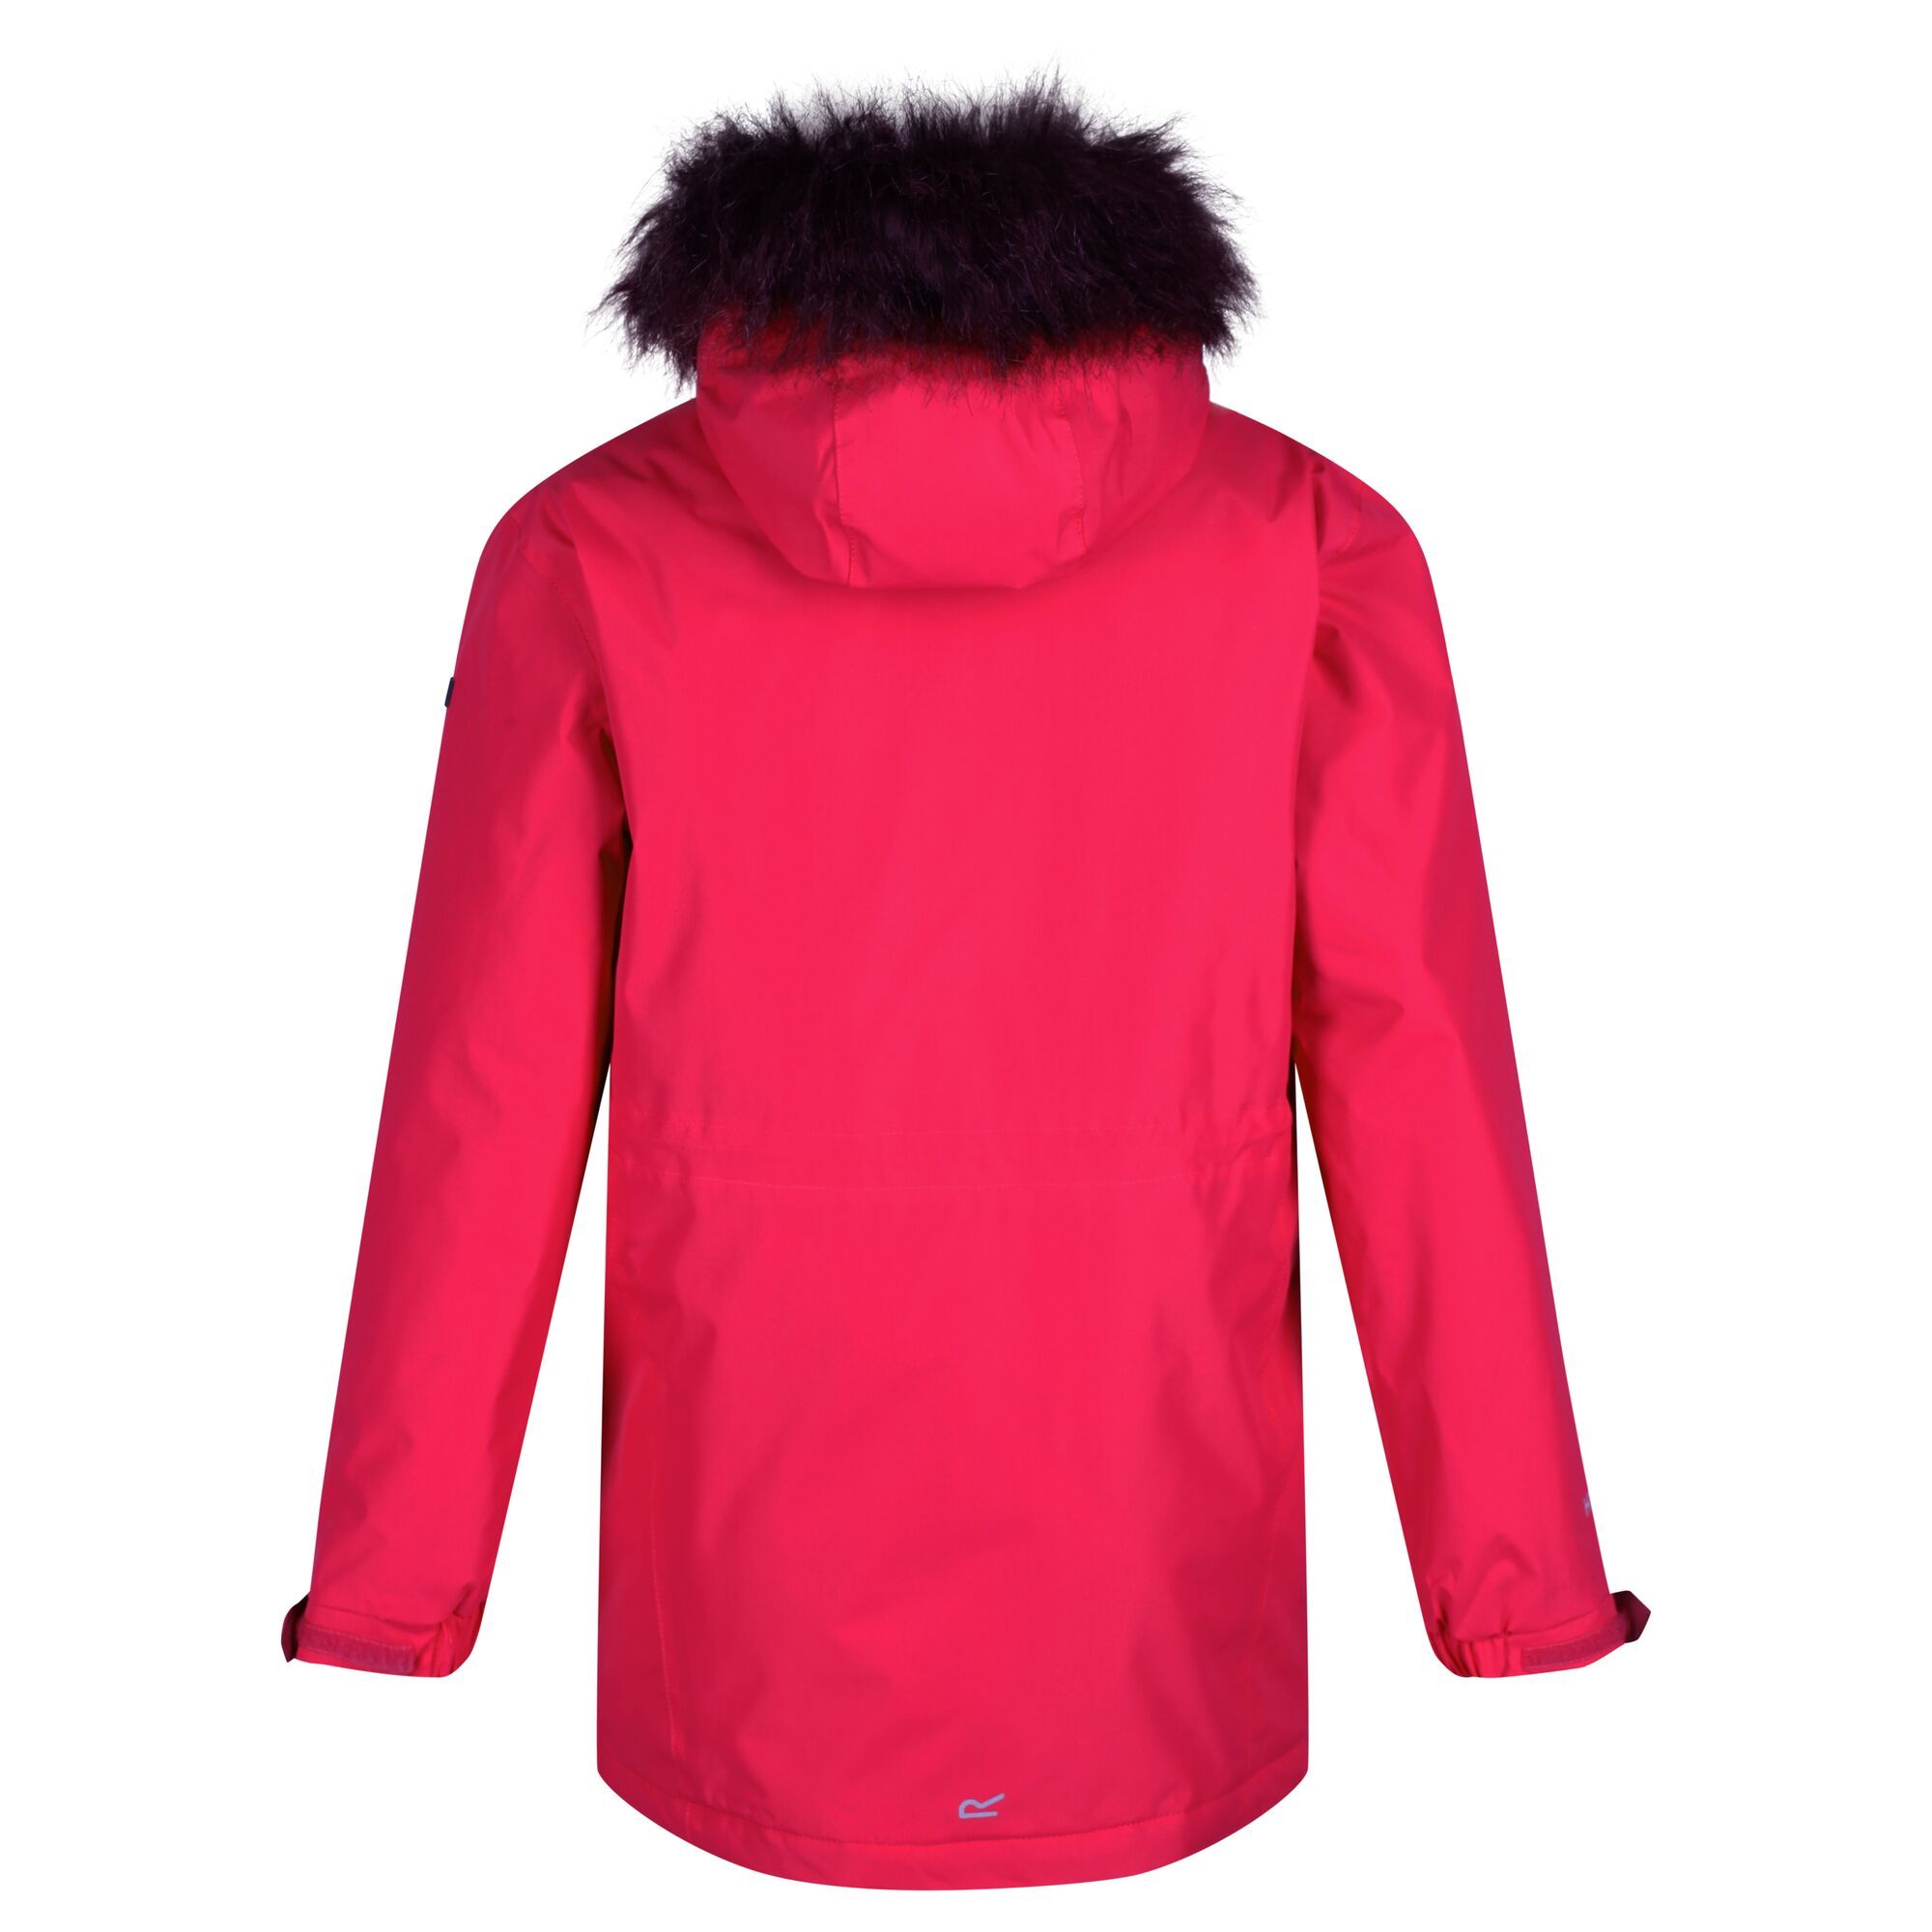 Made from Isotex 5000 coated polyester peached fabric with a 100% polyester taffeta lining. Waterproof and breathable fabric with a water repellent finish. Taped seams. Thermoguard insulation. Features include a faux fur trimmed hood, zip and stormflap fastening and cosy handwarmer pockets on the side. Elasticated and adjustable cuffs. 2 Lower handwarmer pockets. Adjustable drawcord hem. With reflective trim and the Regatta Outdoors badge on the left sleeve. Size (height/chest): (2 Years) 92cm/53-55cm, (3-4 Years) 98-104cm/55-57cm, (5-6 Years) 110-116cm/59-61cm, (7-8 Years) 122-128cm/63-67cm, (9-10 Years) 135-140cm/69-73cm, (11-12 Years) 146-152cm/75-79cm, (13 Years) 153-158cm/82cm, (14 Years) 164-170cm/86cm, (15-16 Years) 170-176cm/89-92cm.